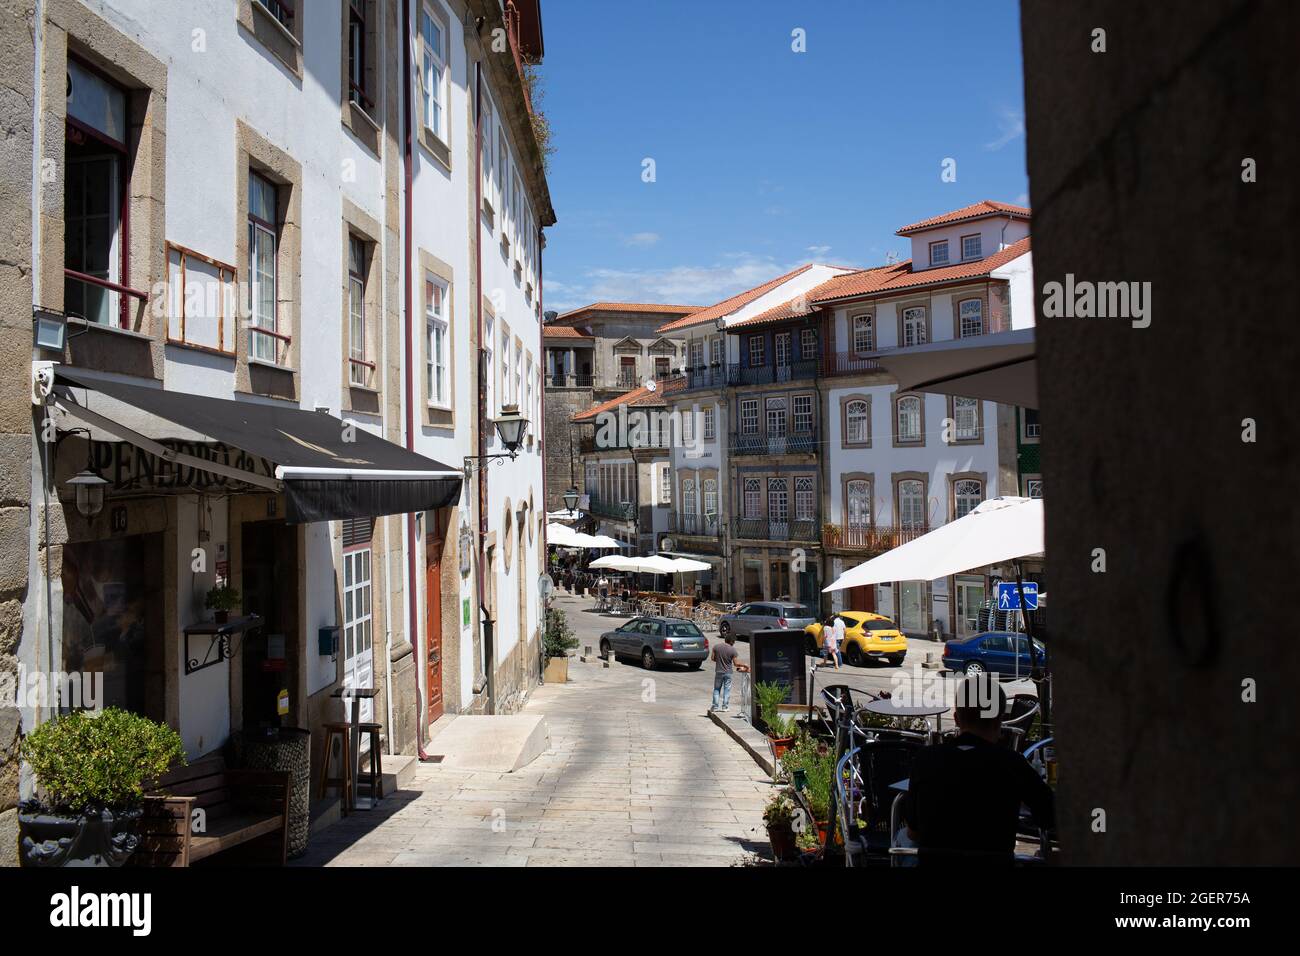 Viseu, Portugal - July 31, 2021: one of the streets in the old town of Viseu. Stock Photo